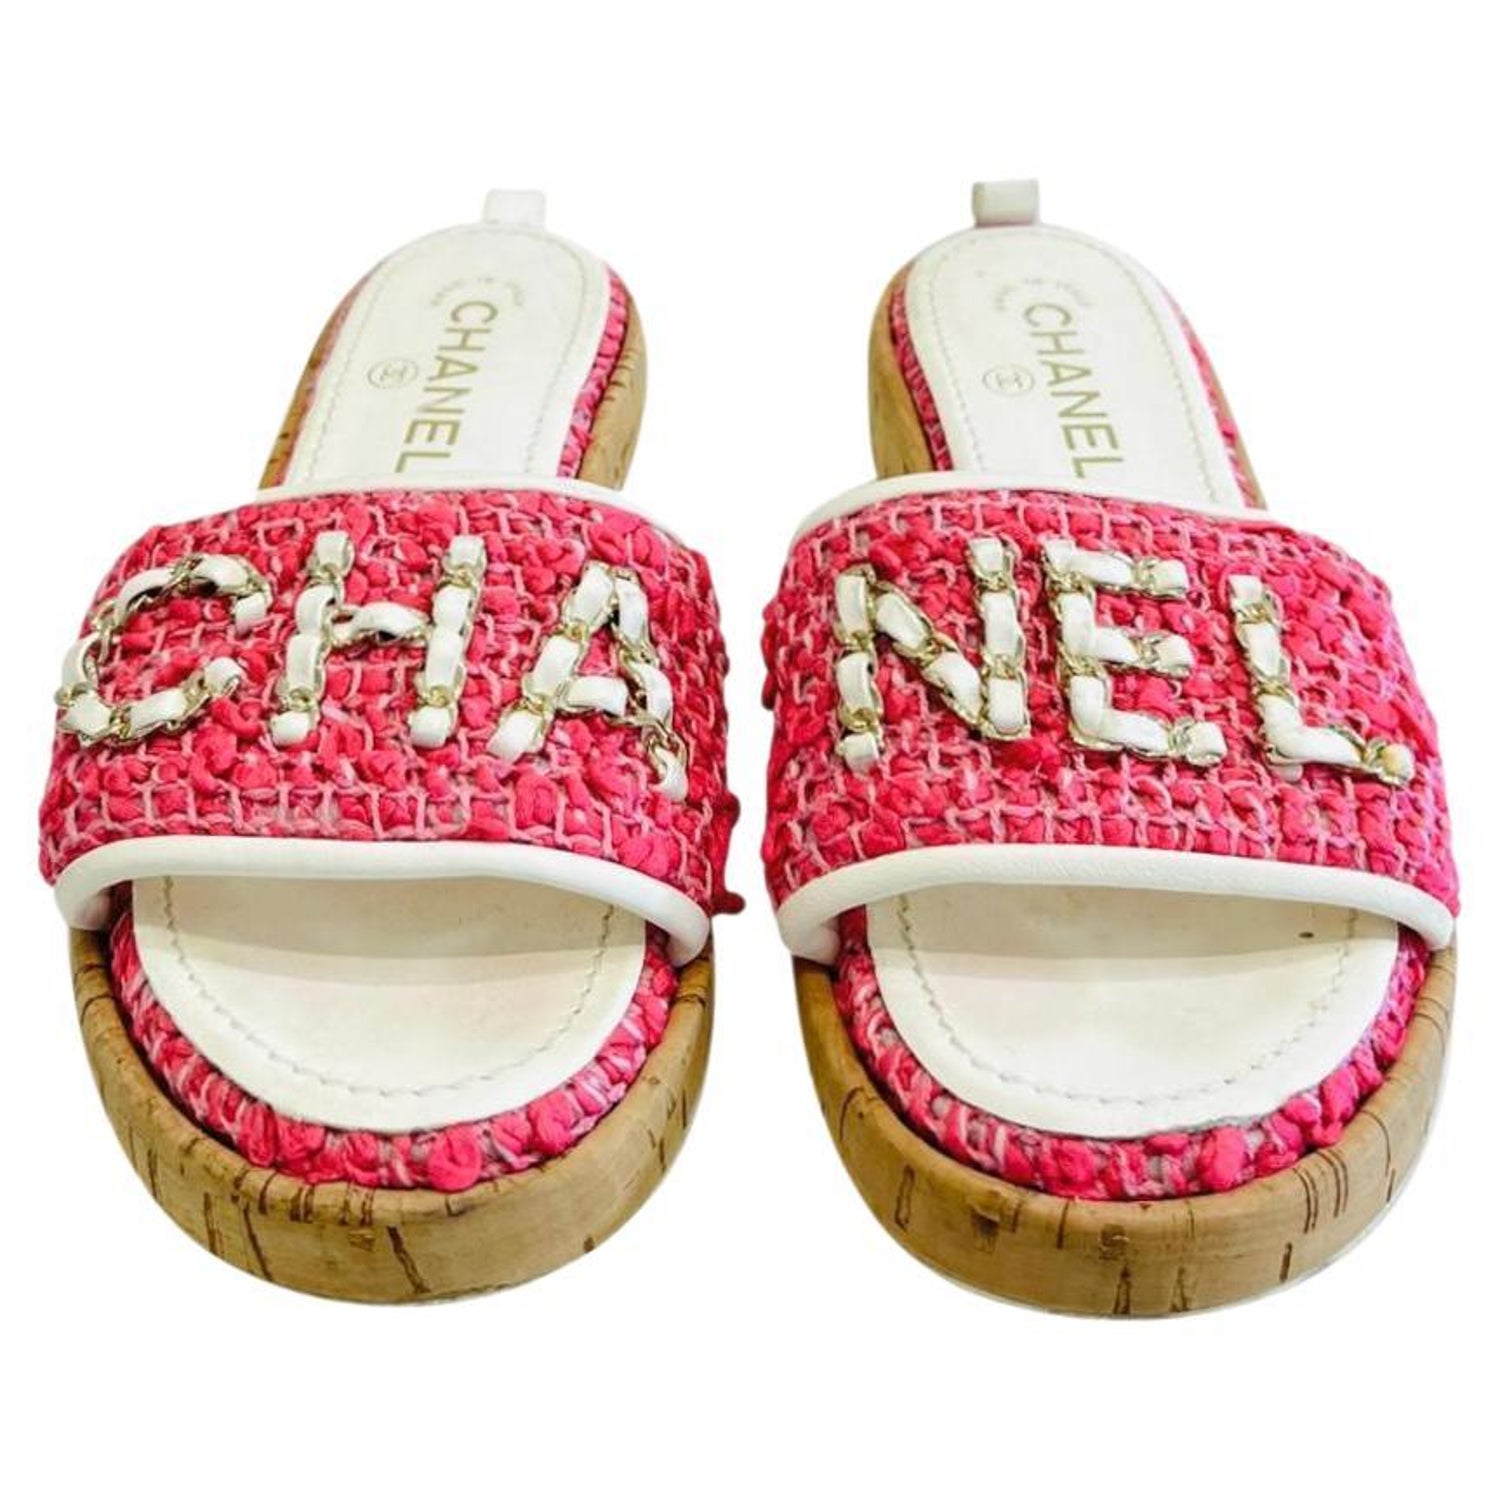 CHANEL, Shoes